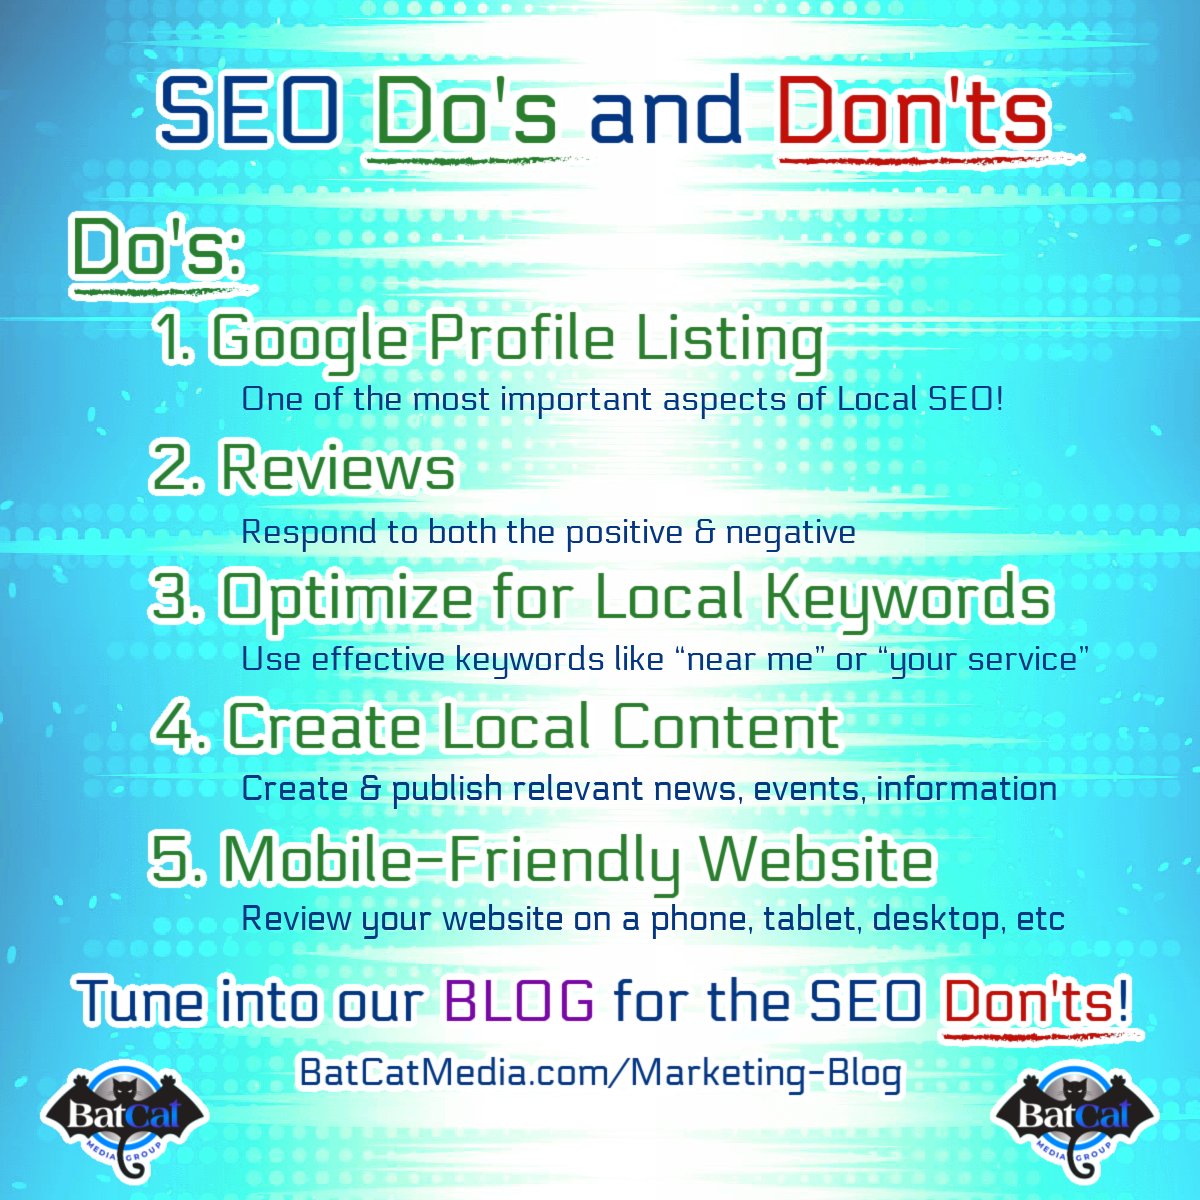 We want to help take your business to the NEXT LEVEL.  🚀 Check out blog for the full list of SEO Do's and Don'ts!  🌐
#BatCatMediaGroup #MarketingBlog